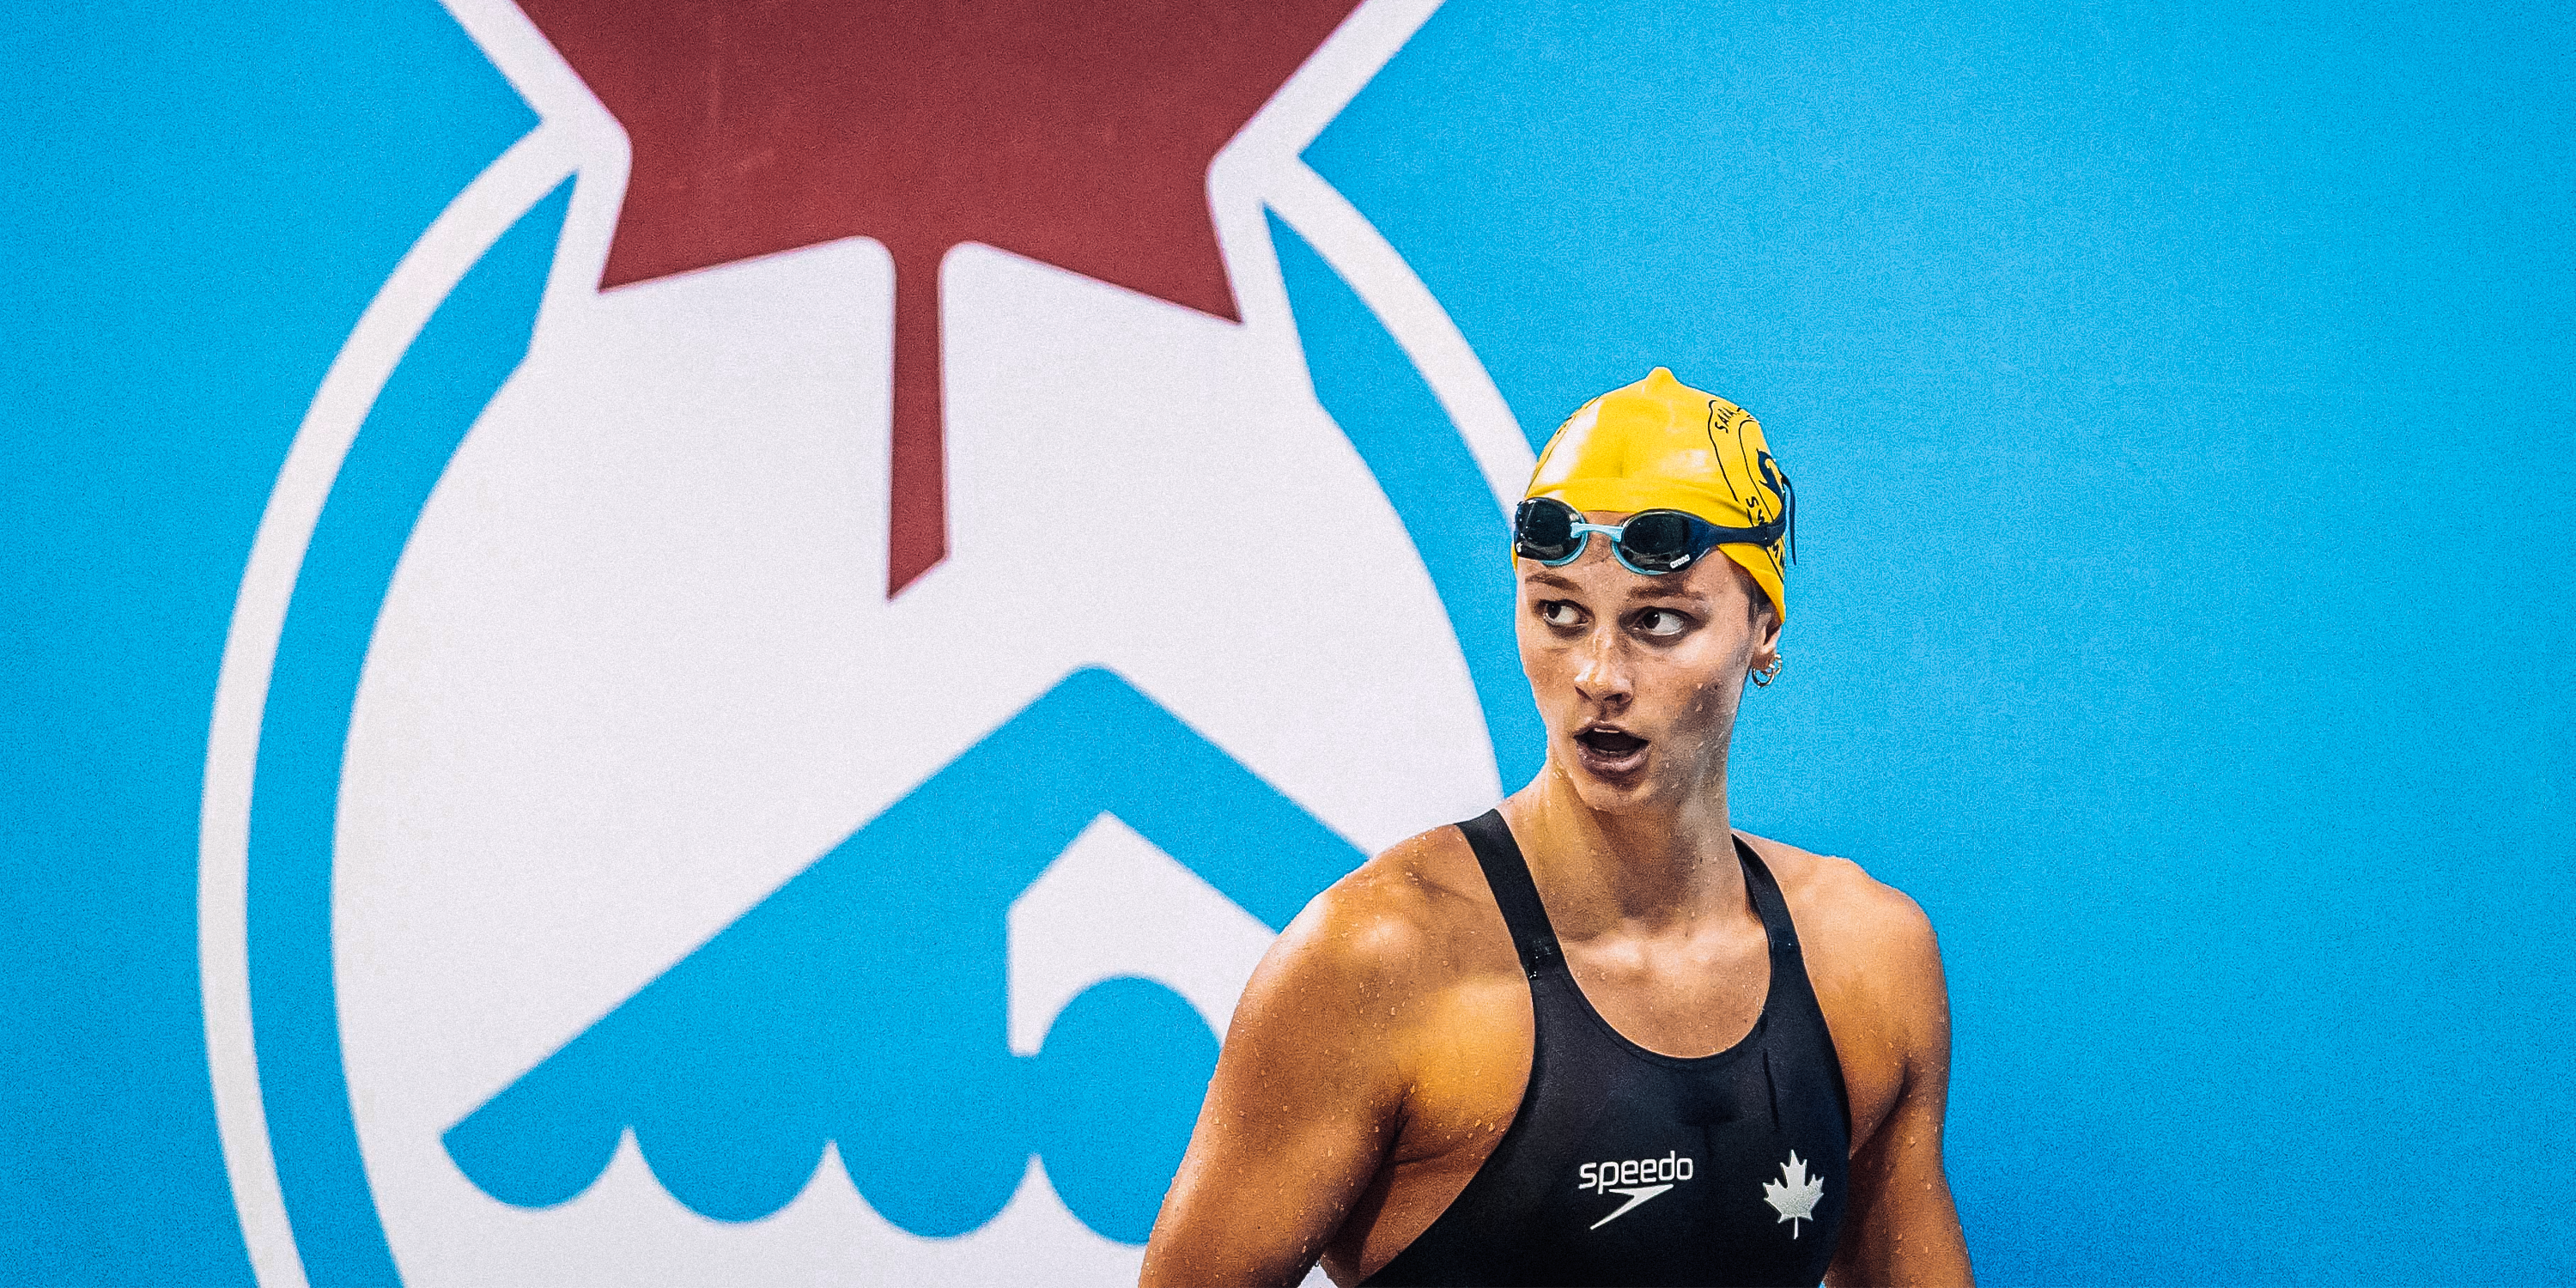 At 17, swimmer Summer McIntosh is poised to become a breakout star at the Paris Olympics